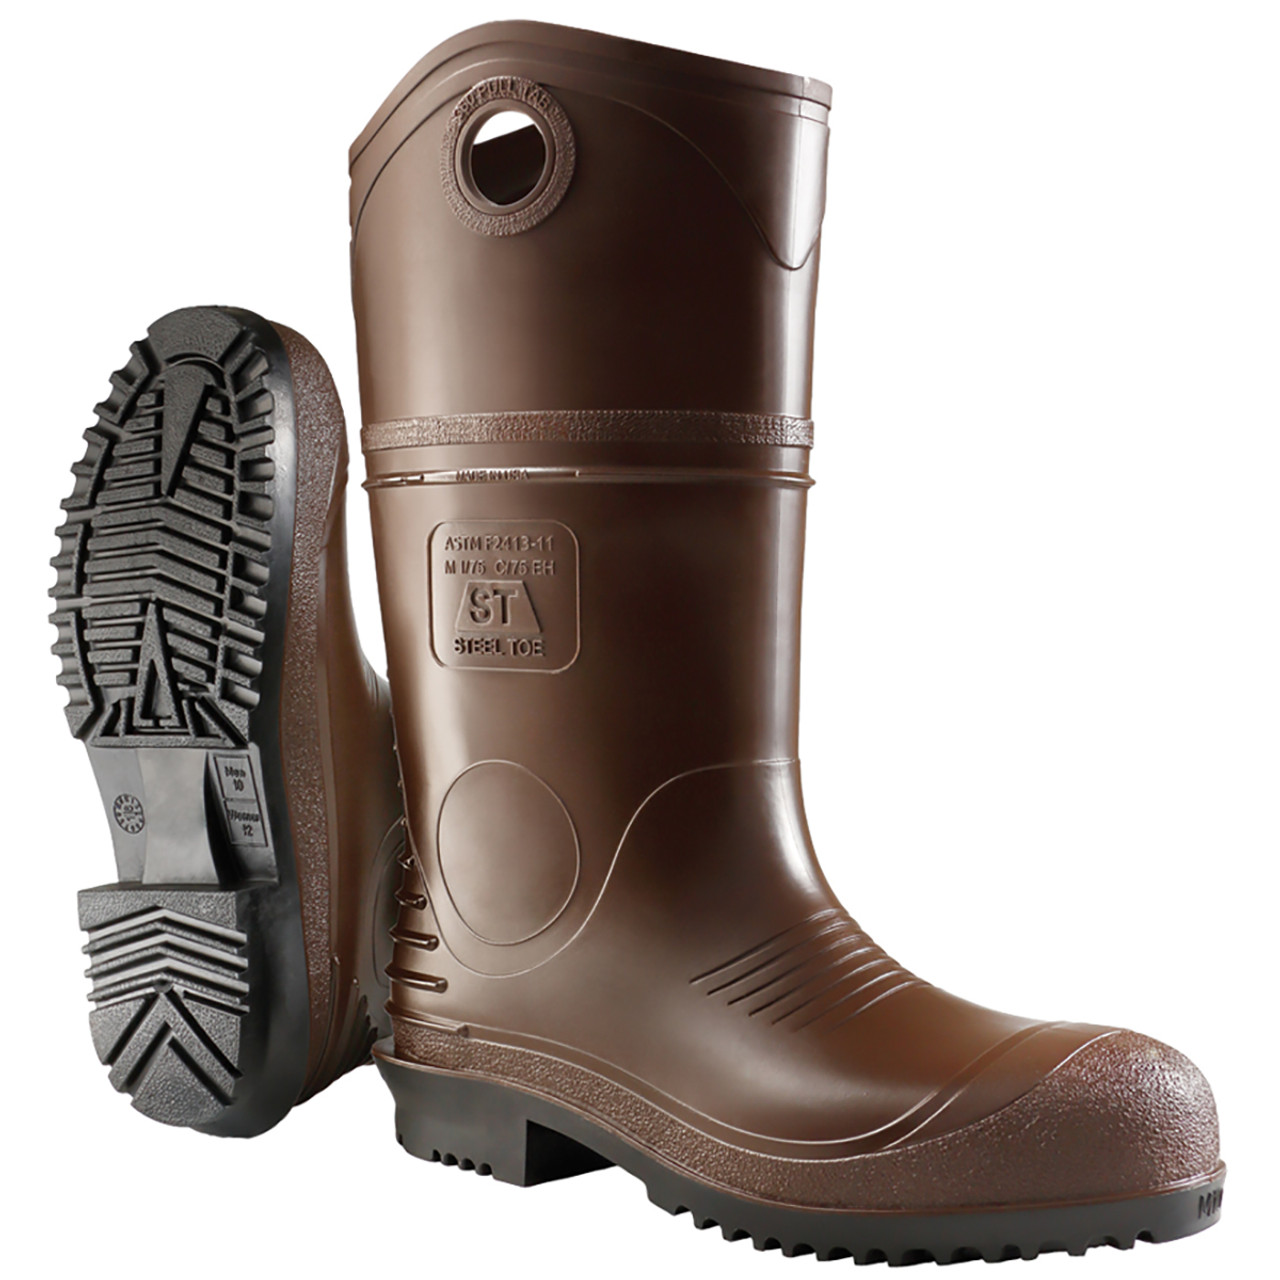 oil and chemical resistant boots